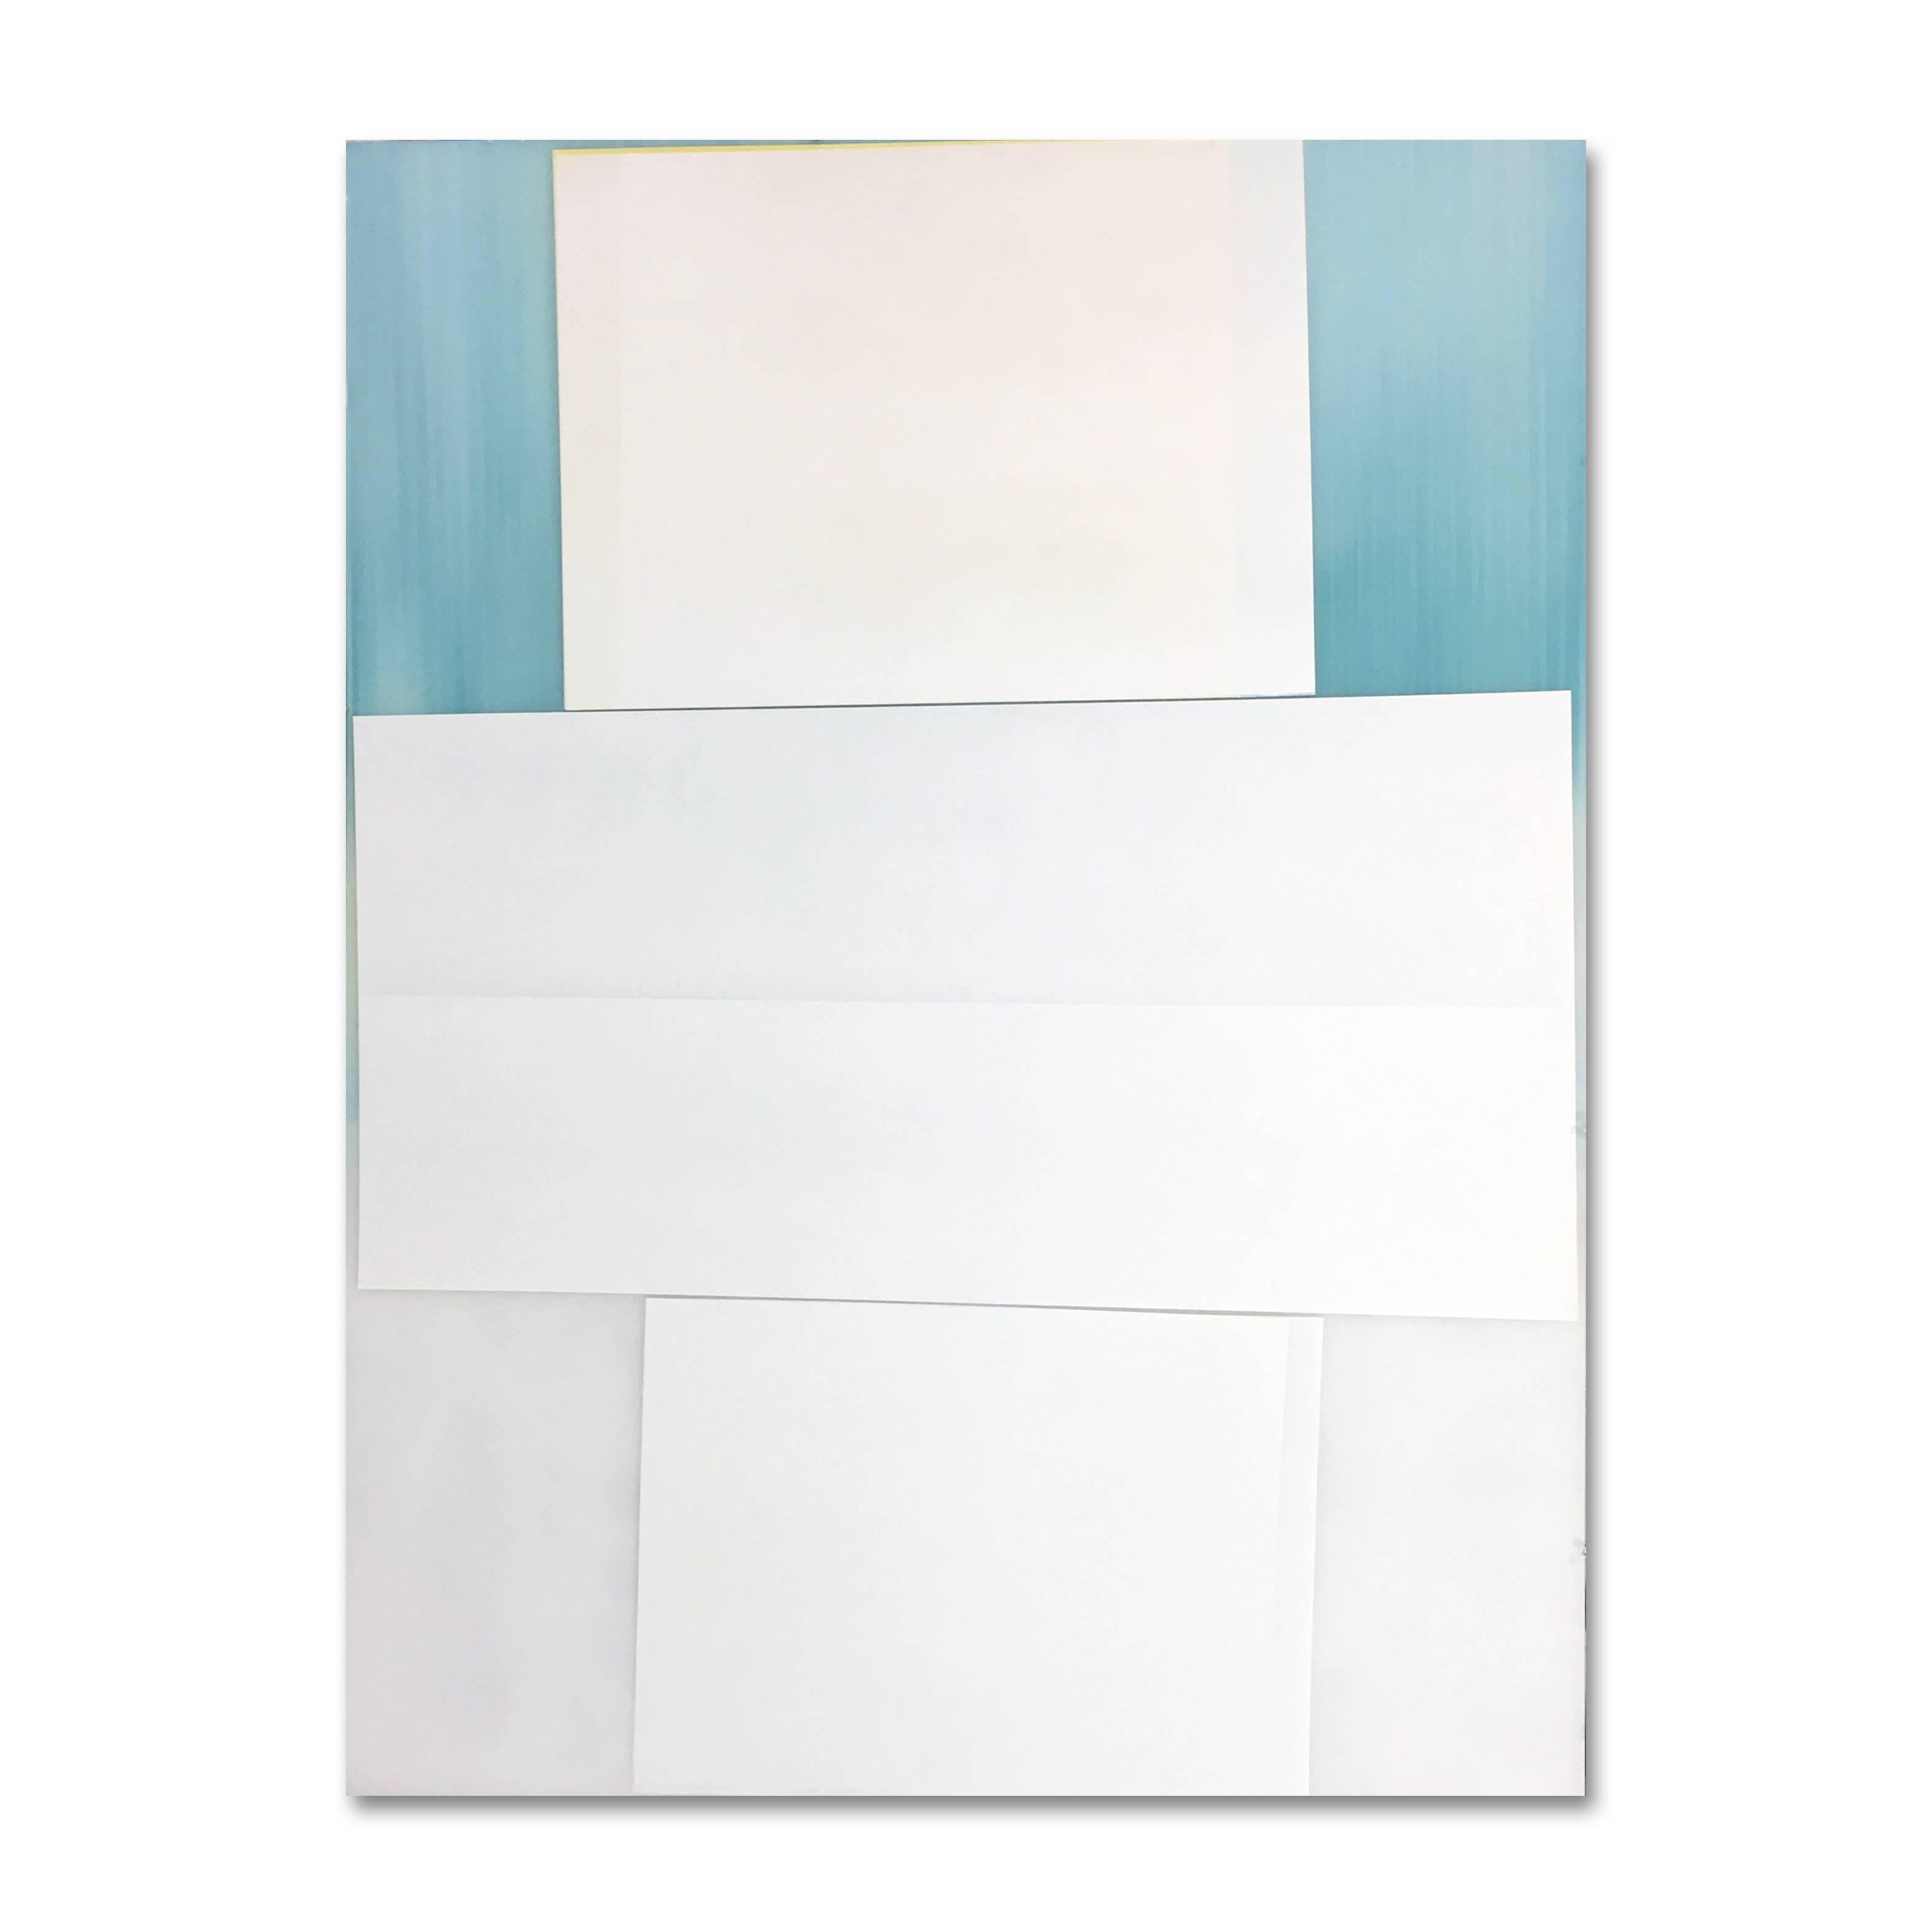 Jeffrey Cortland Jones
Switch (Backside Smith), 2016
enamel on acrylic panel
48 x 36 in.

This original enamel painting on acrylic panel by Jeffrey Cortland-Jones represents is signature minimalist style, with layered rectangular shapes in shades of